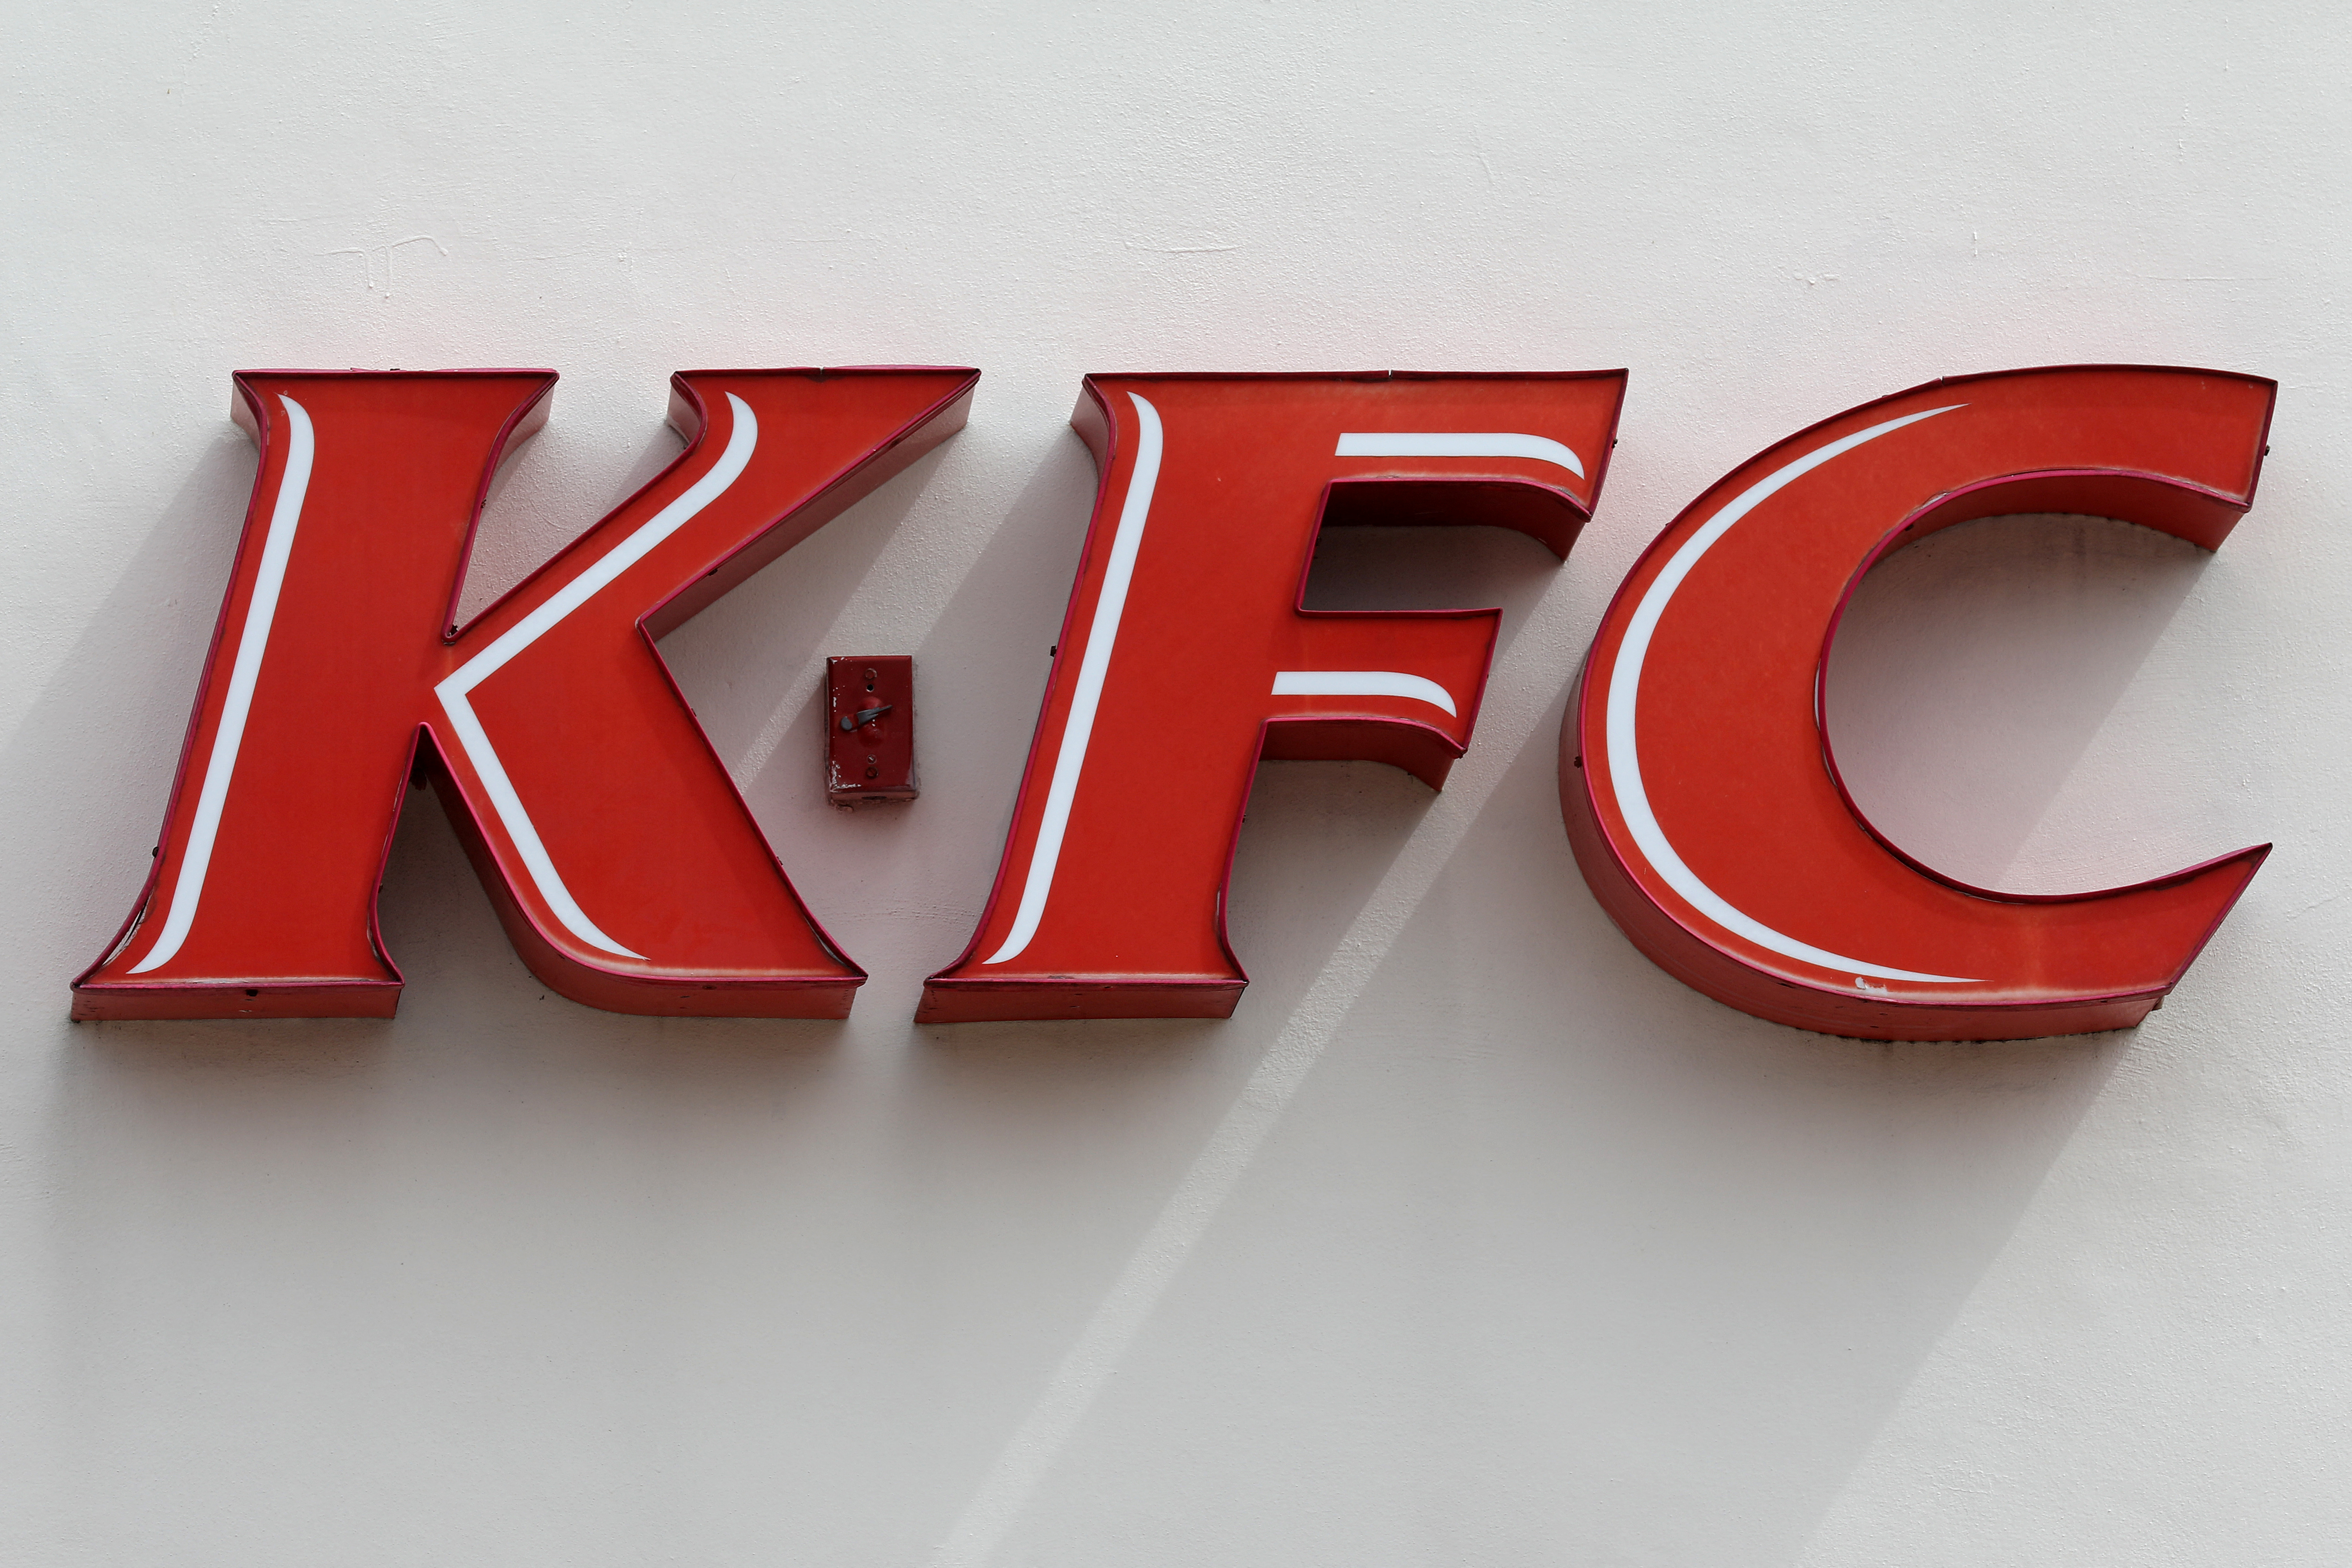 A Kentucky Fried Chicken (KFC) logo is pictured in North Miami Beach